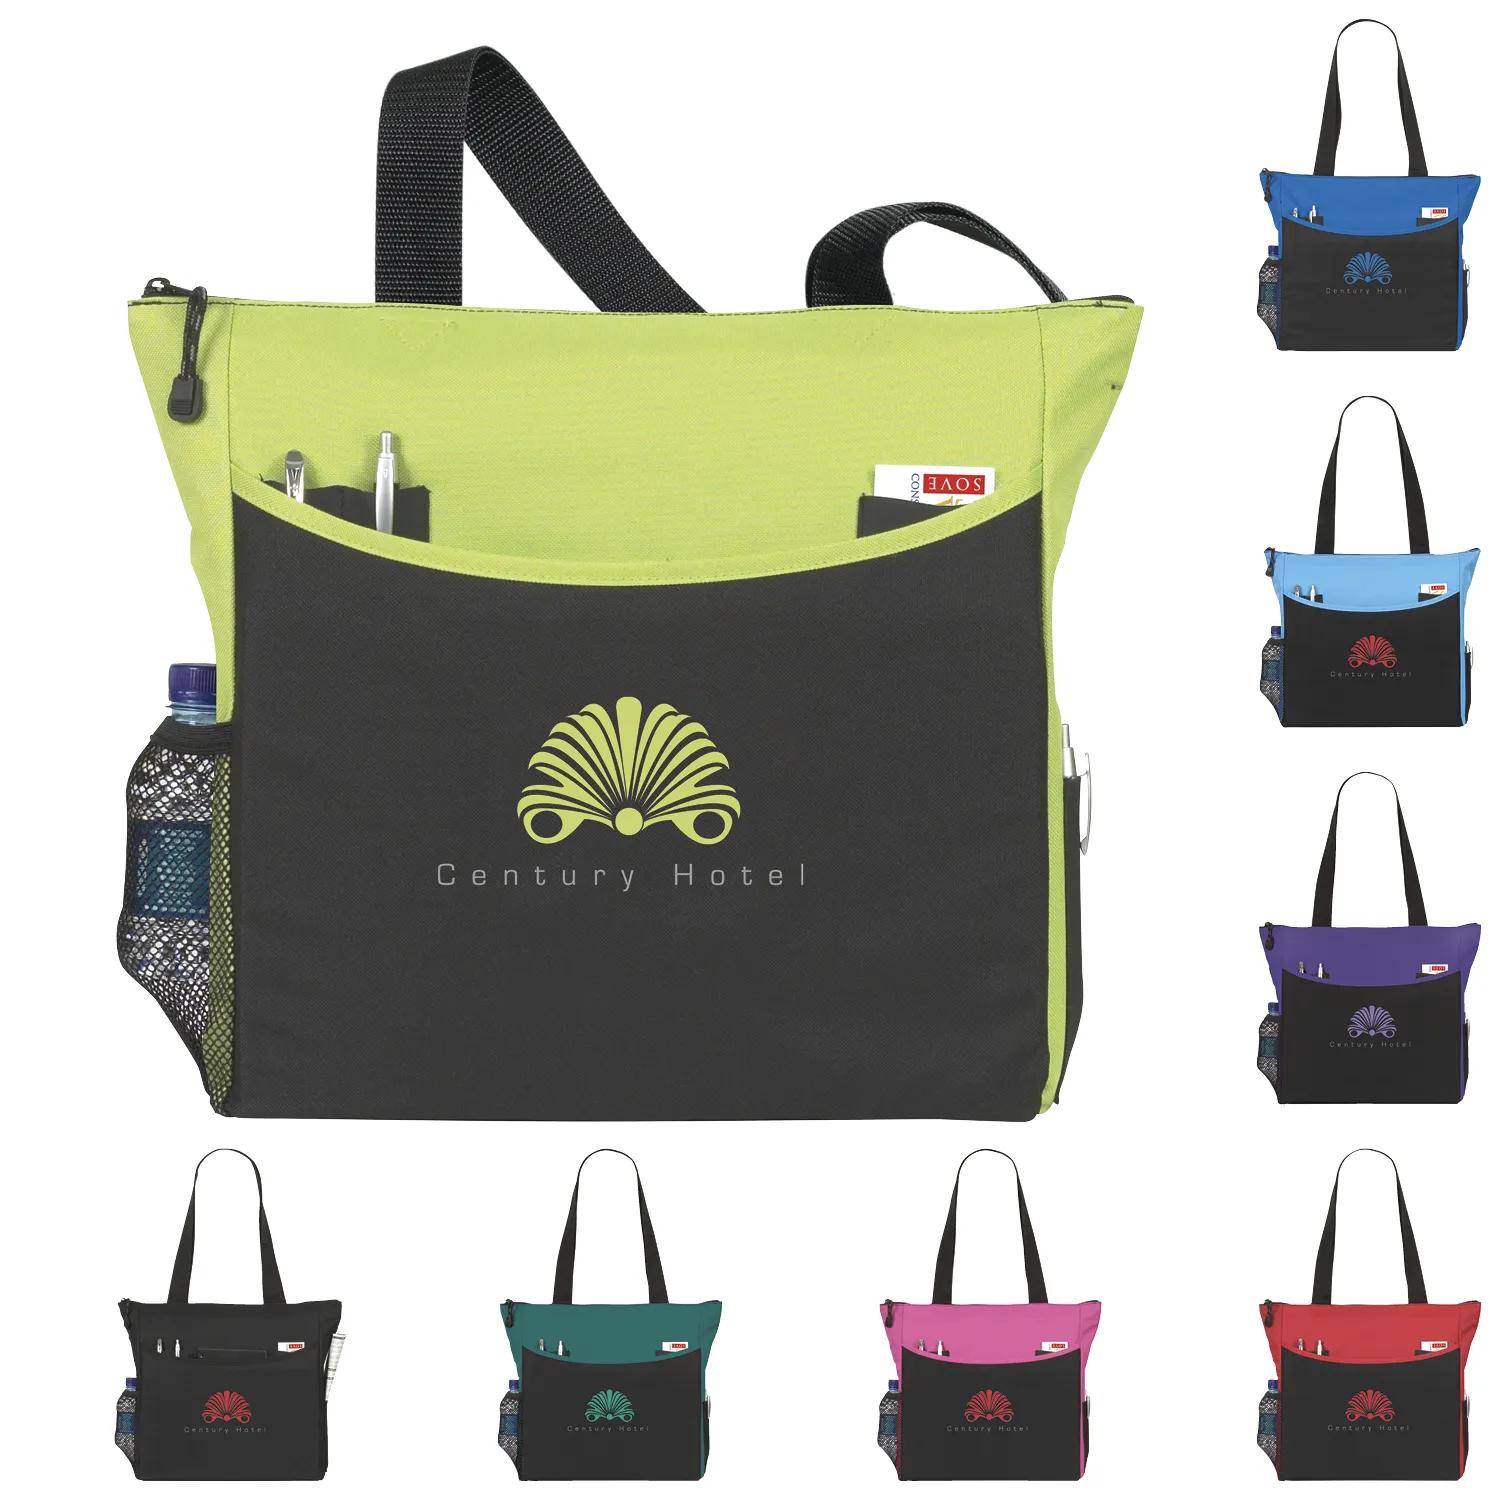 TranSport It Tote 4 of 40